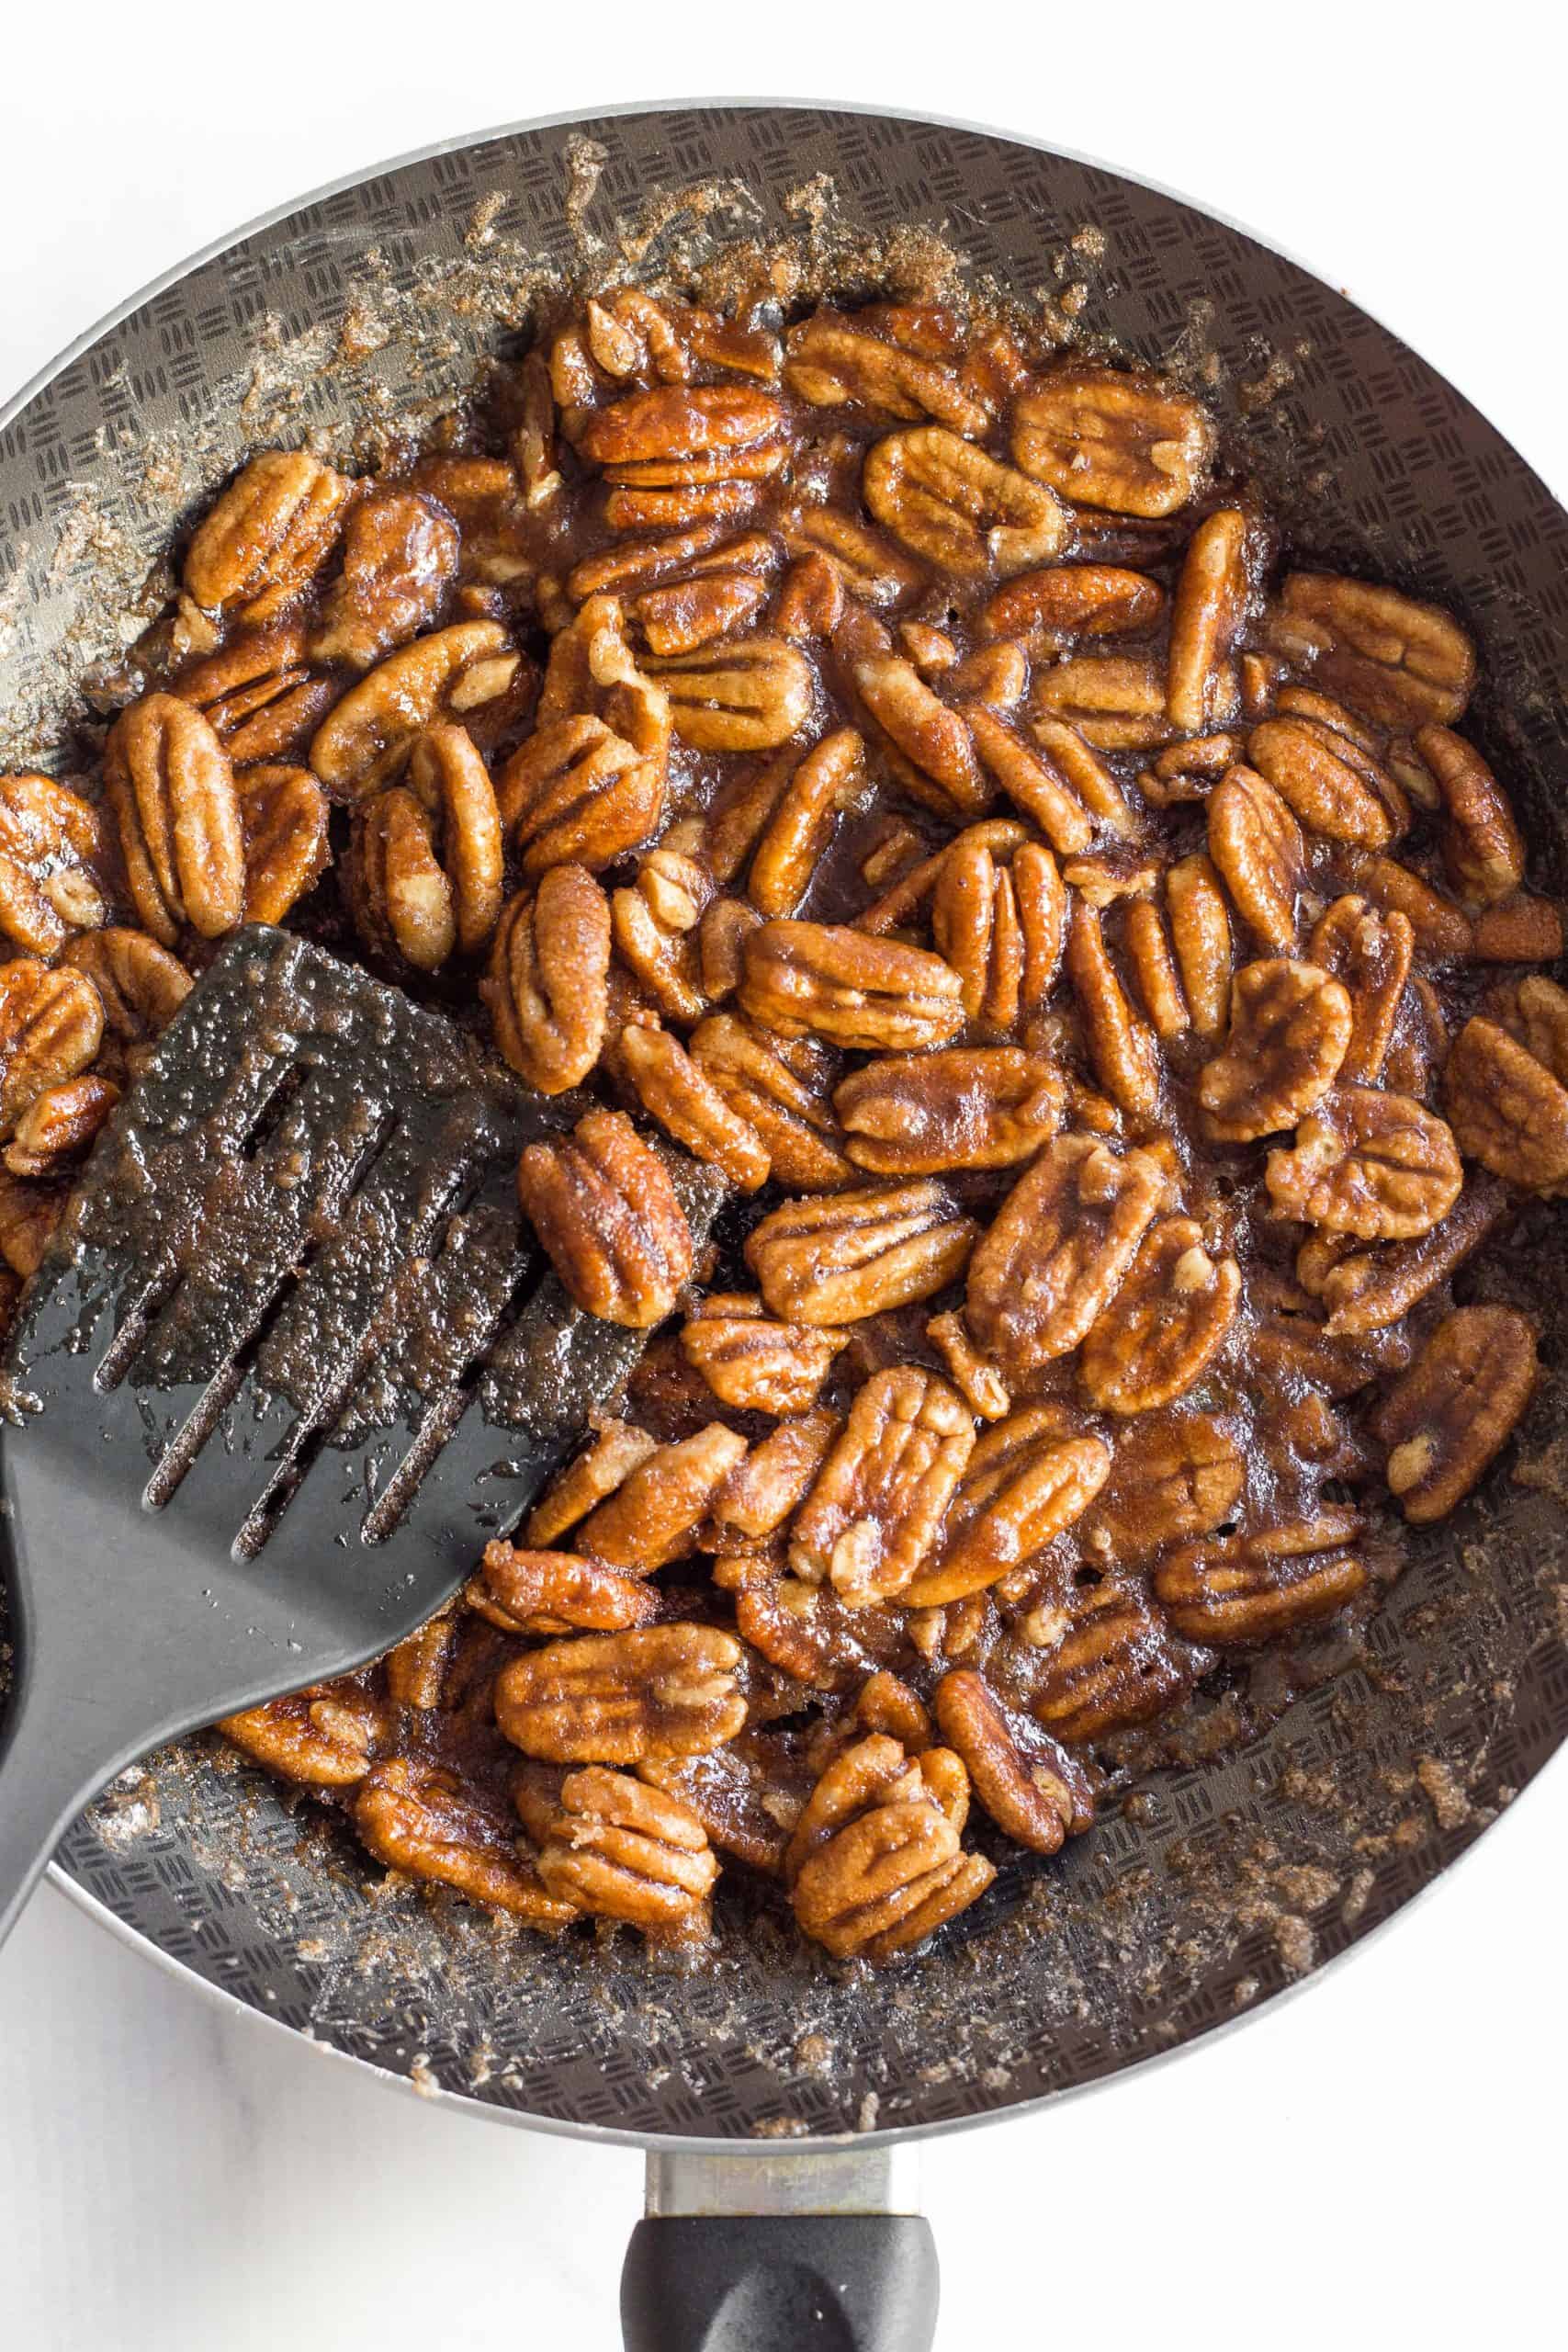 A skillet full of pecans coated with a sugar mixture.